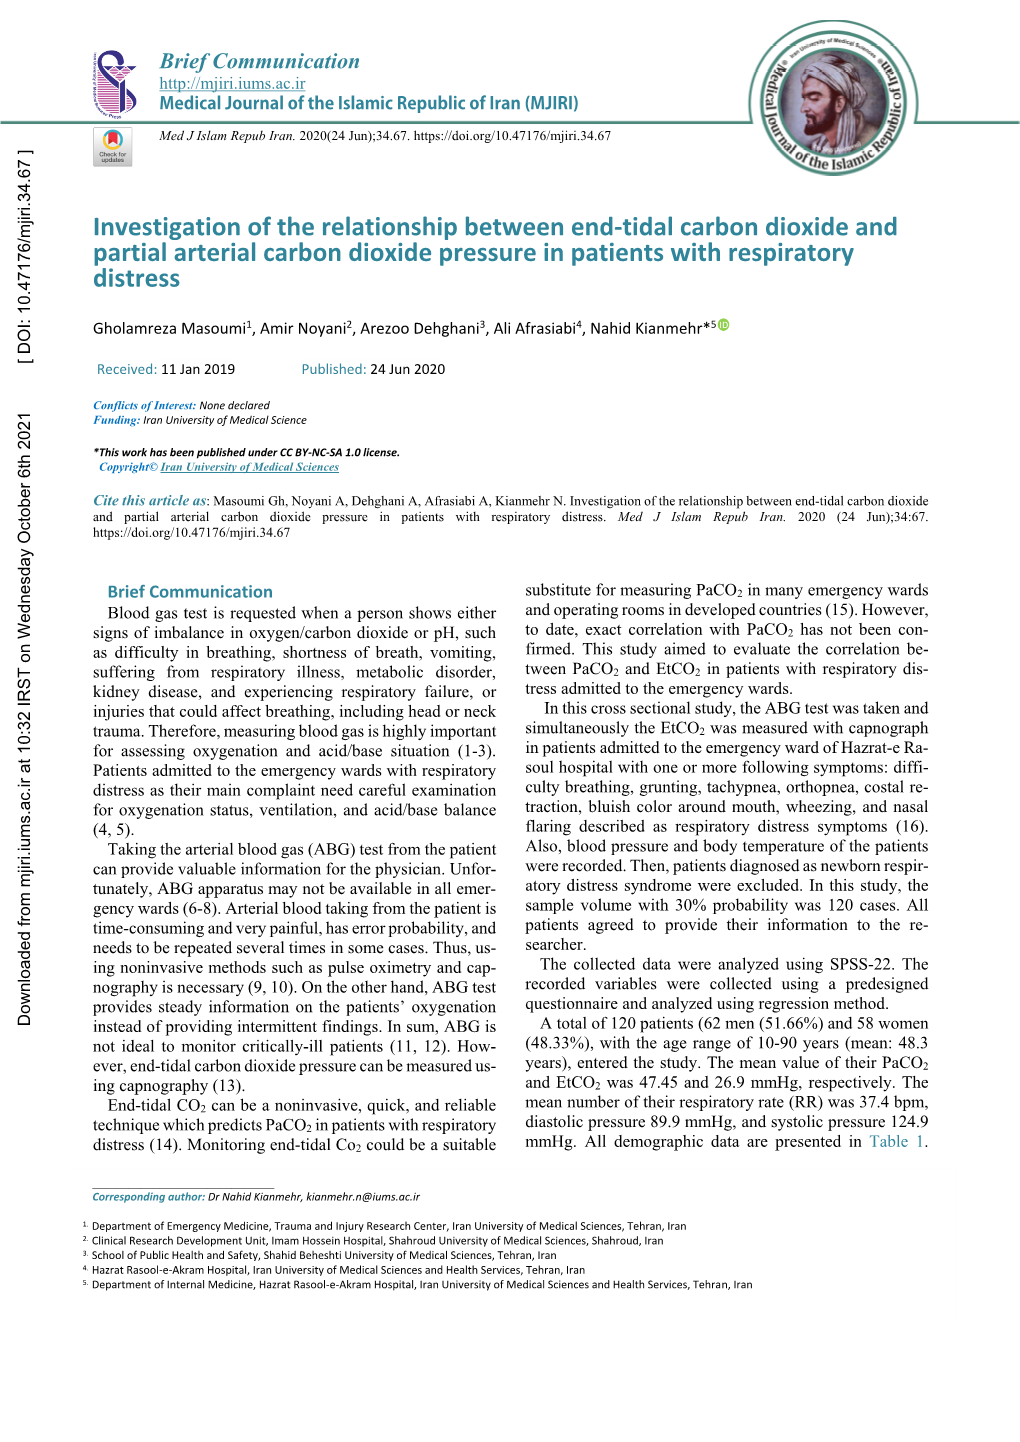 Investigation of the Relationship Between End-Tidal Carbon Dioxide and Partial Arterial Carbon Dioxide Pressure in Patients with Respiratory Distress